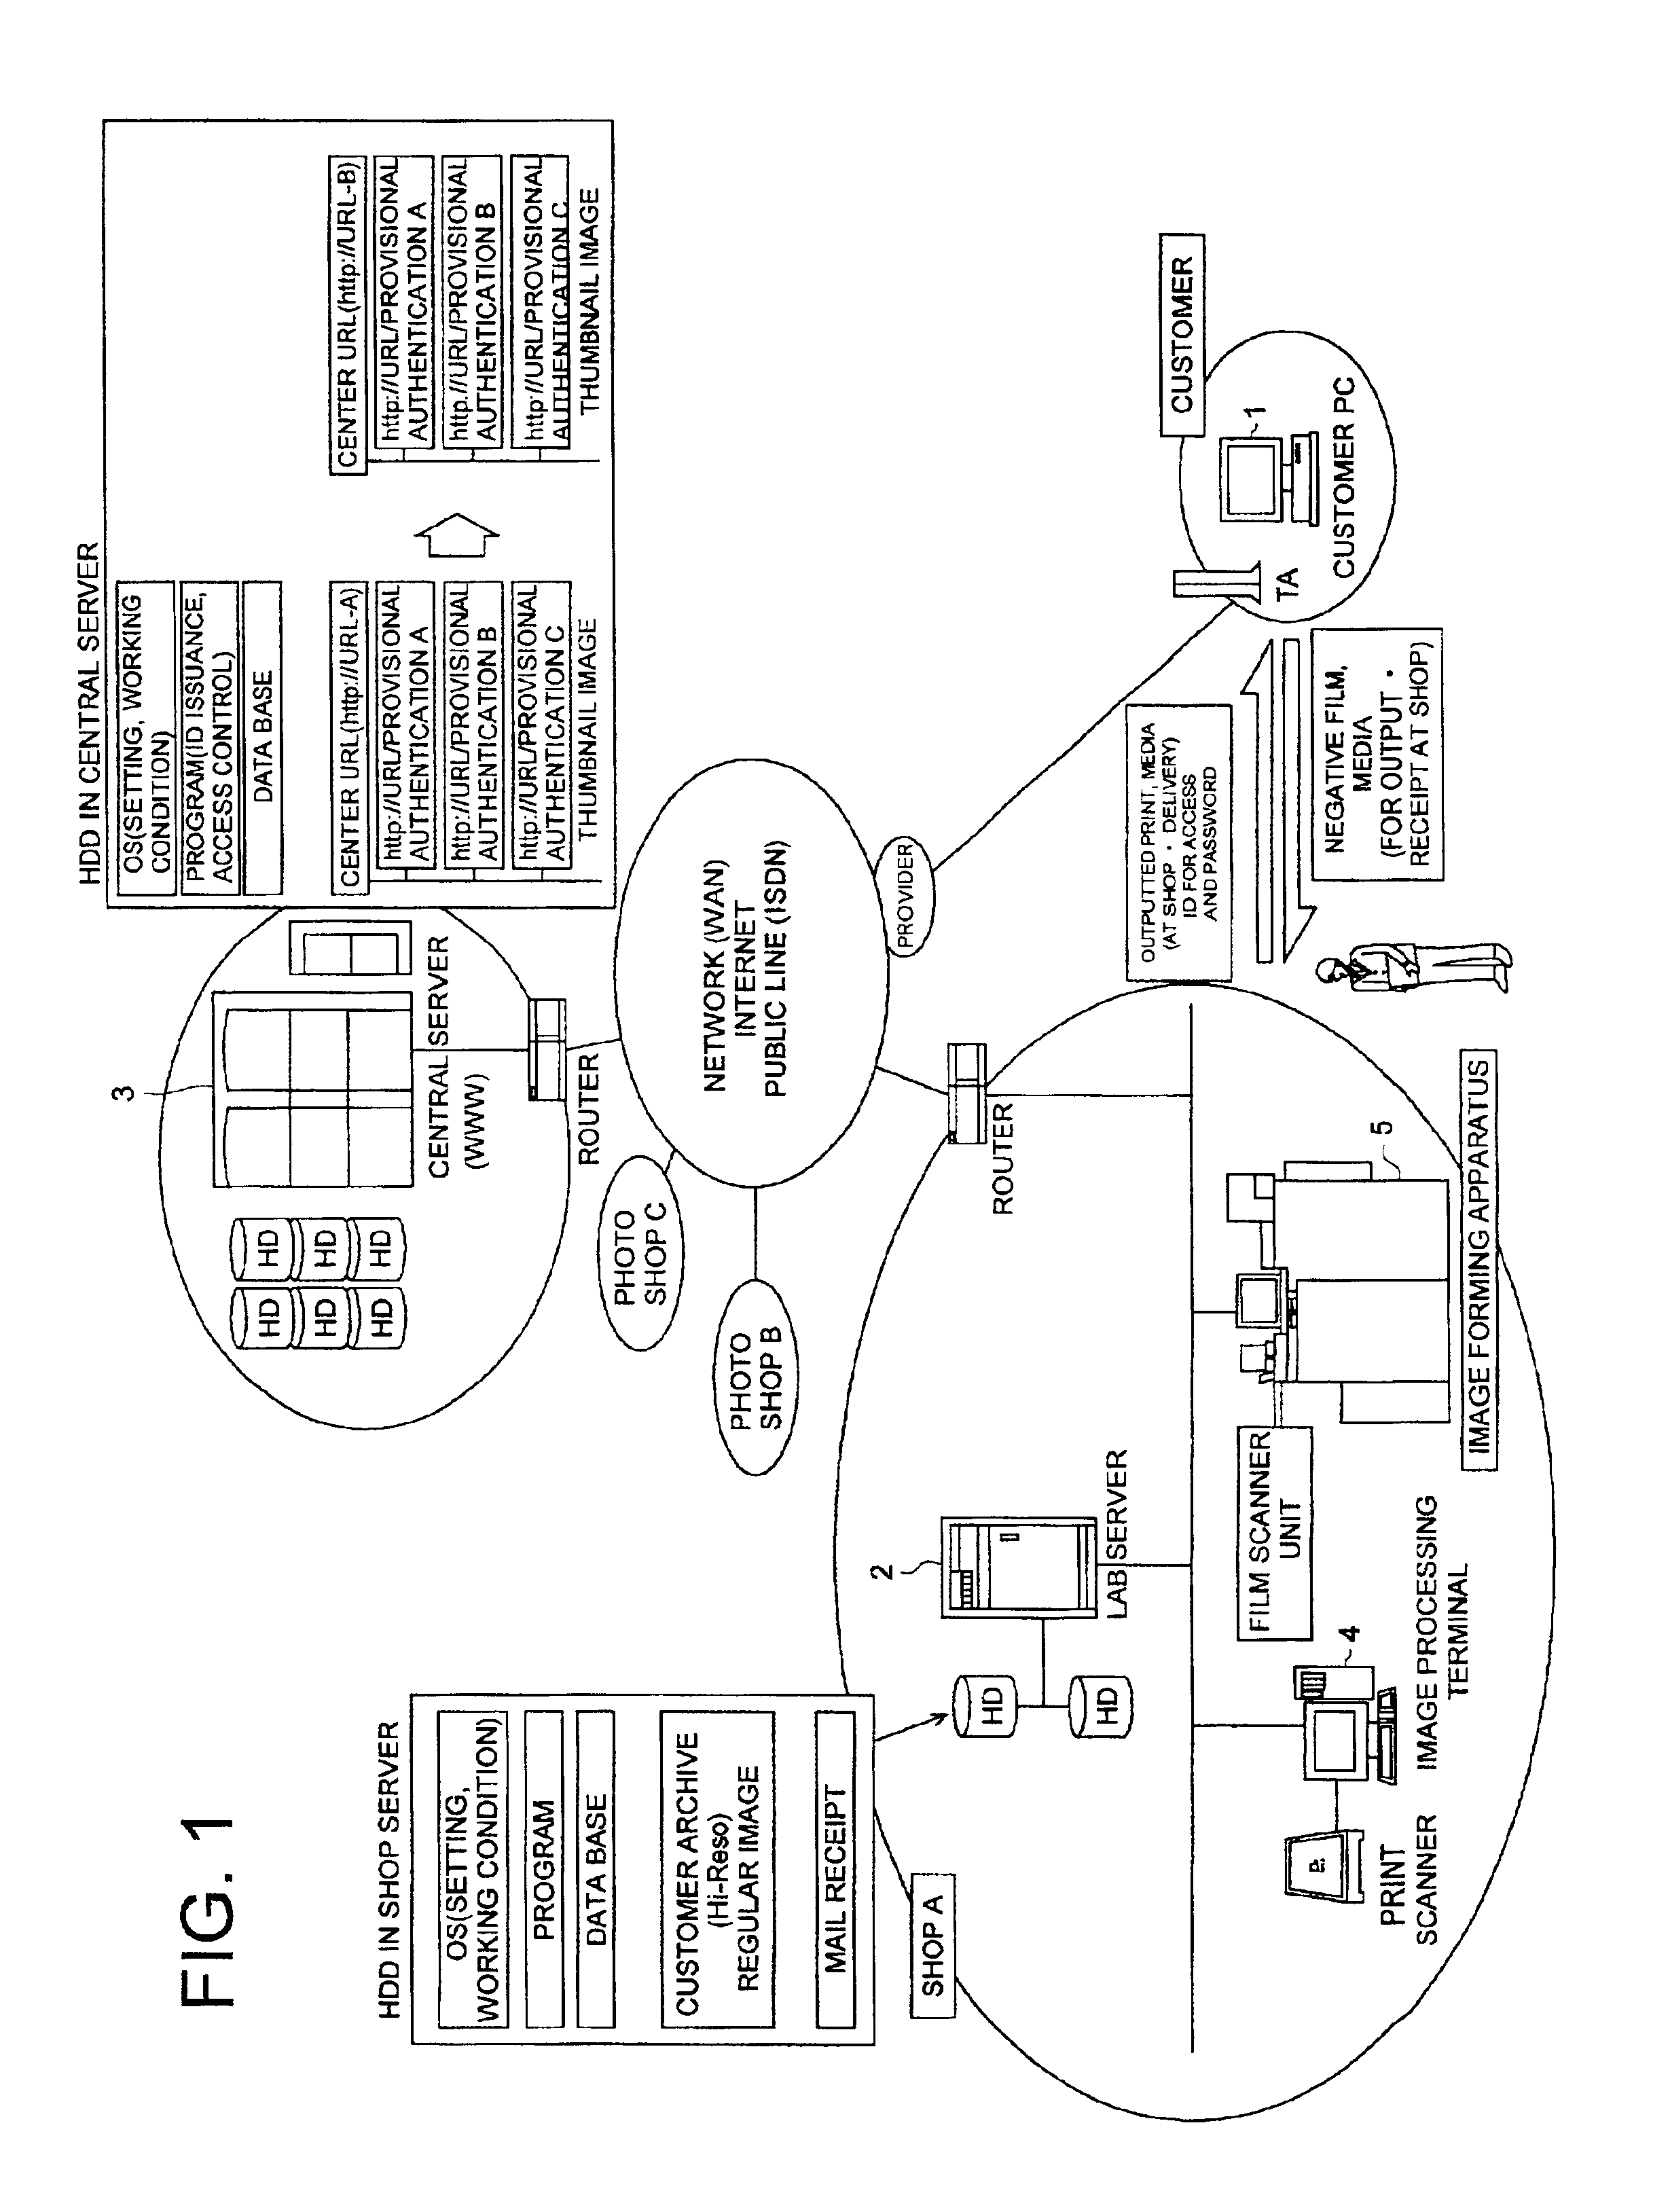 Image data processing system and server system